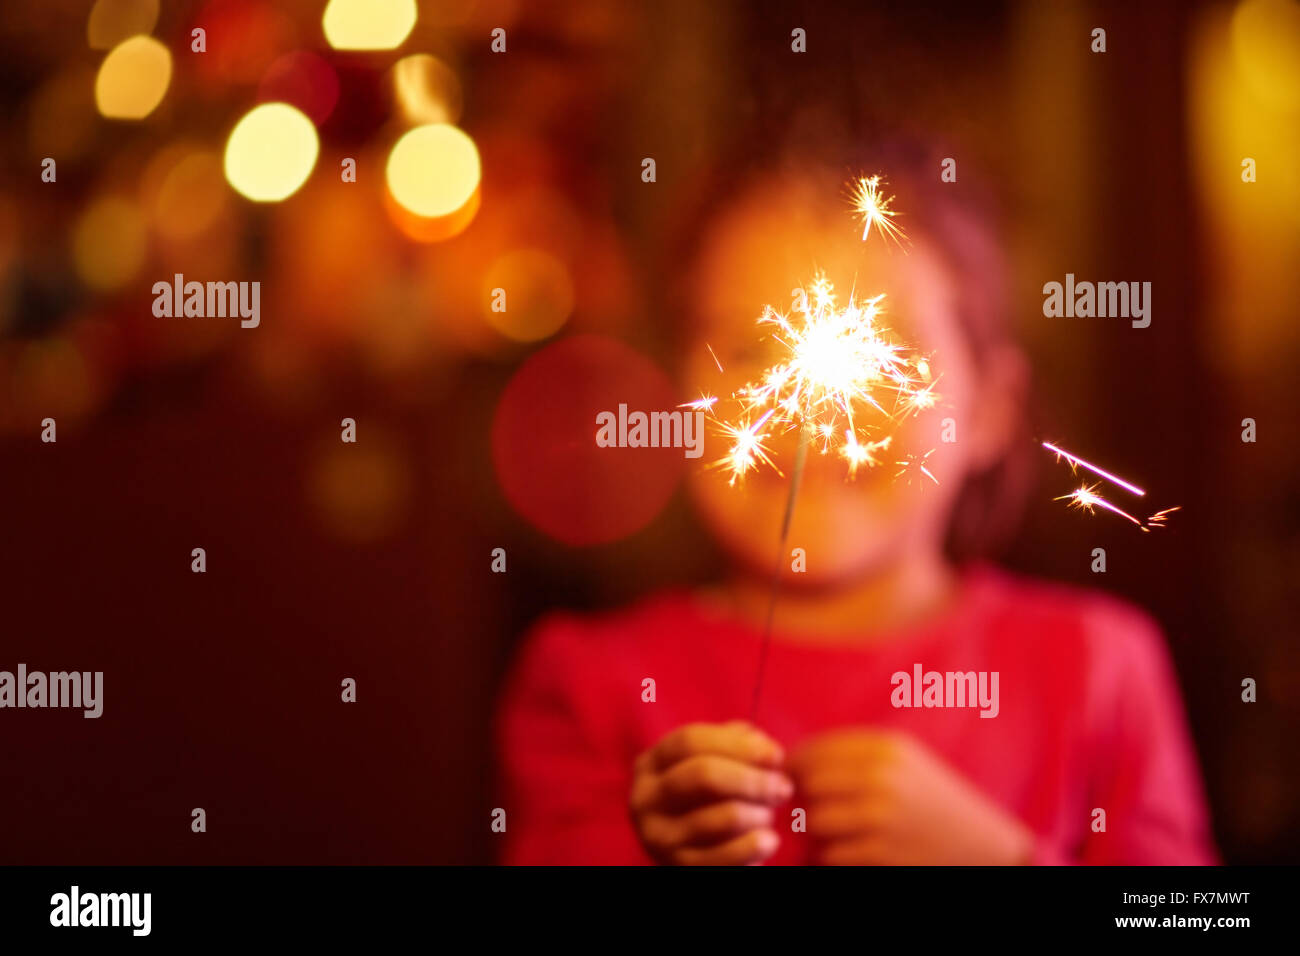 Twinkle twinkle with sparklers Stock Photo